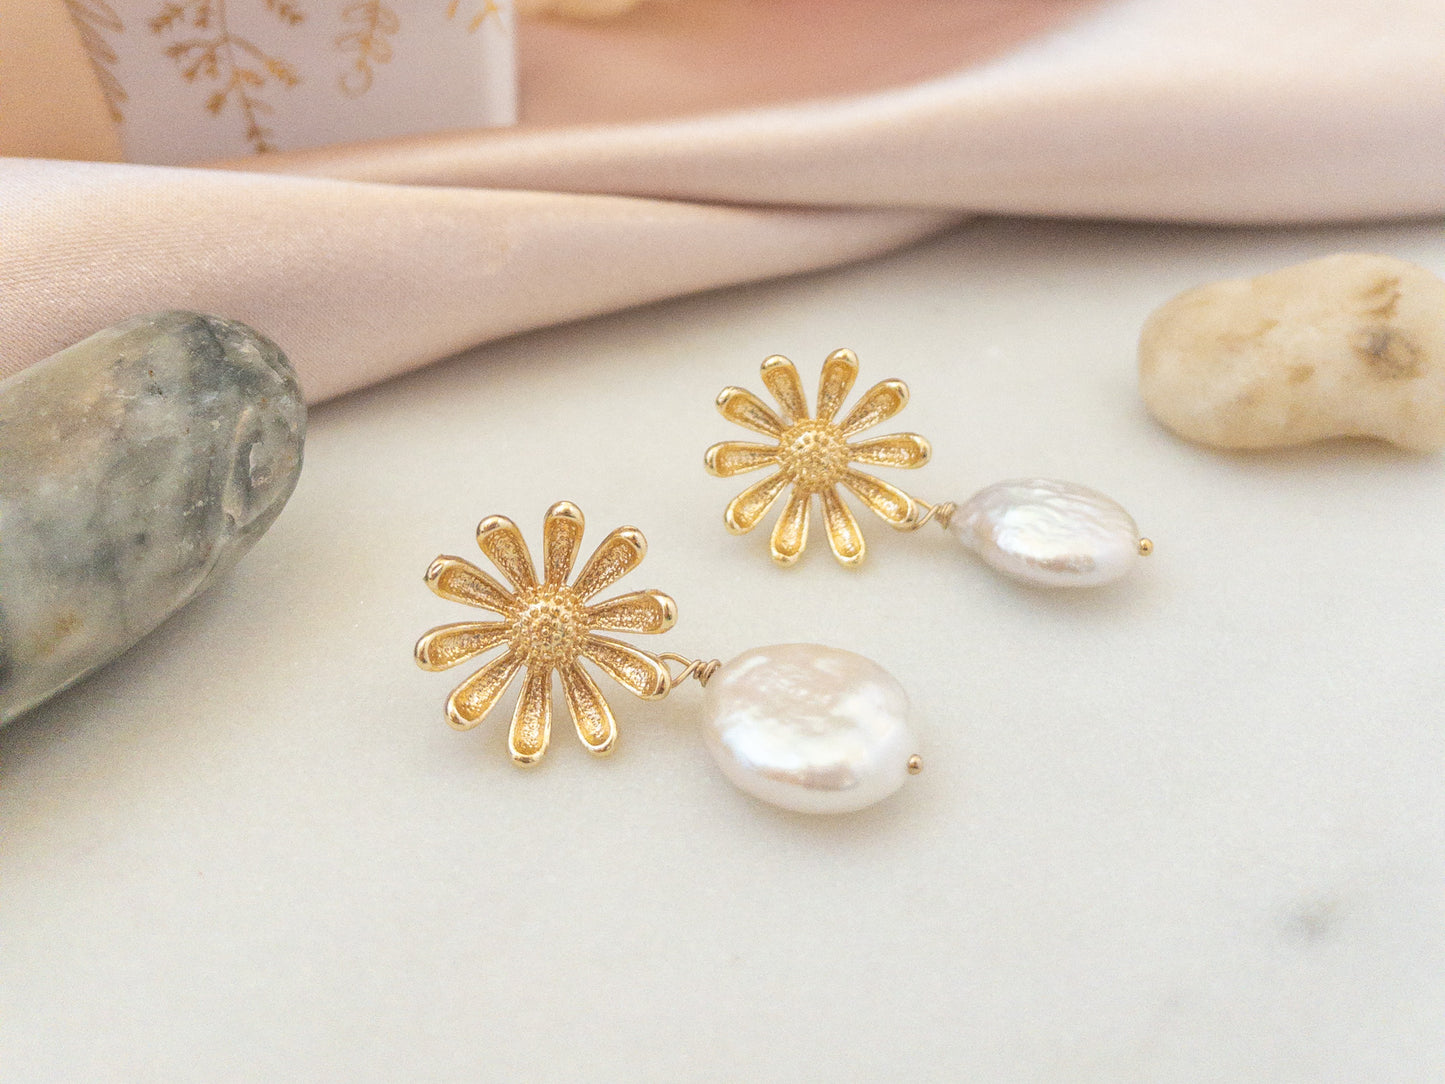 Dainty gold daisy flower post earrings with freshwater pearls by YSM Designs